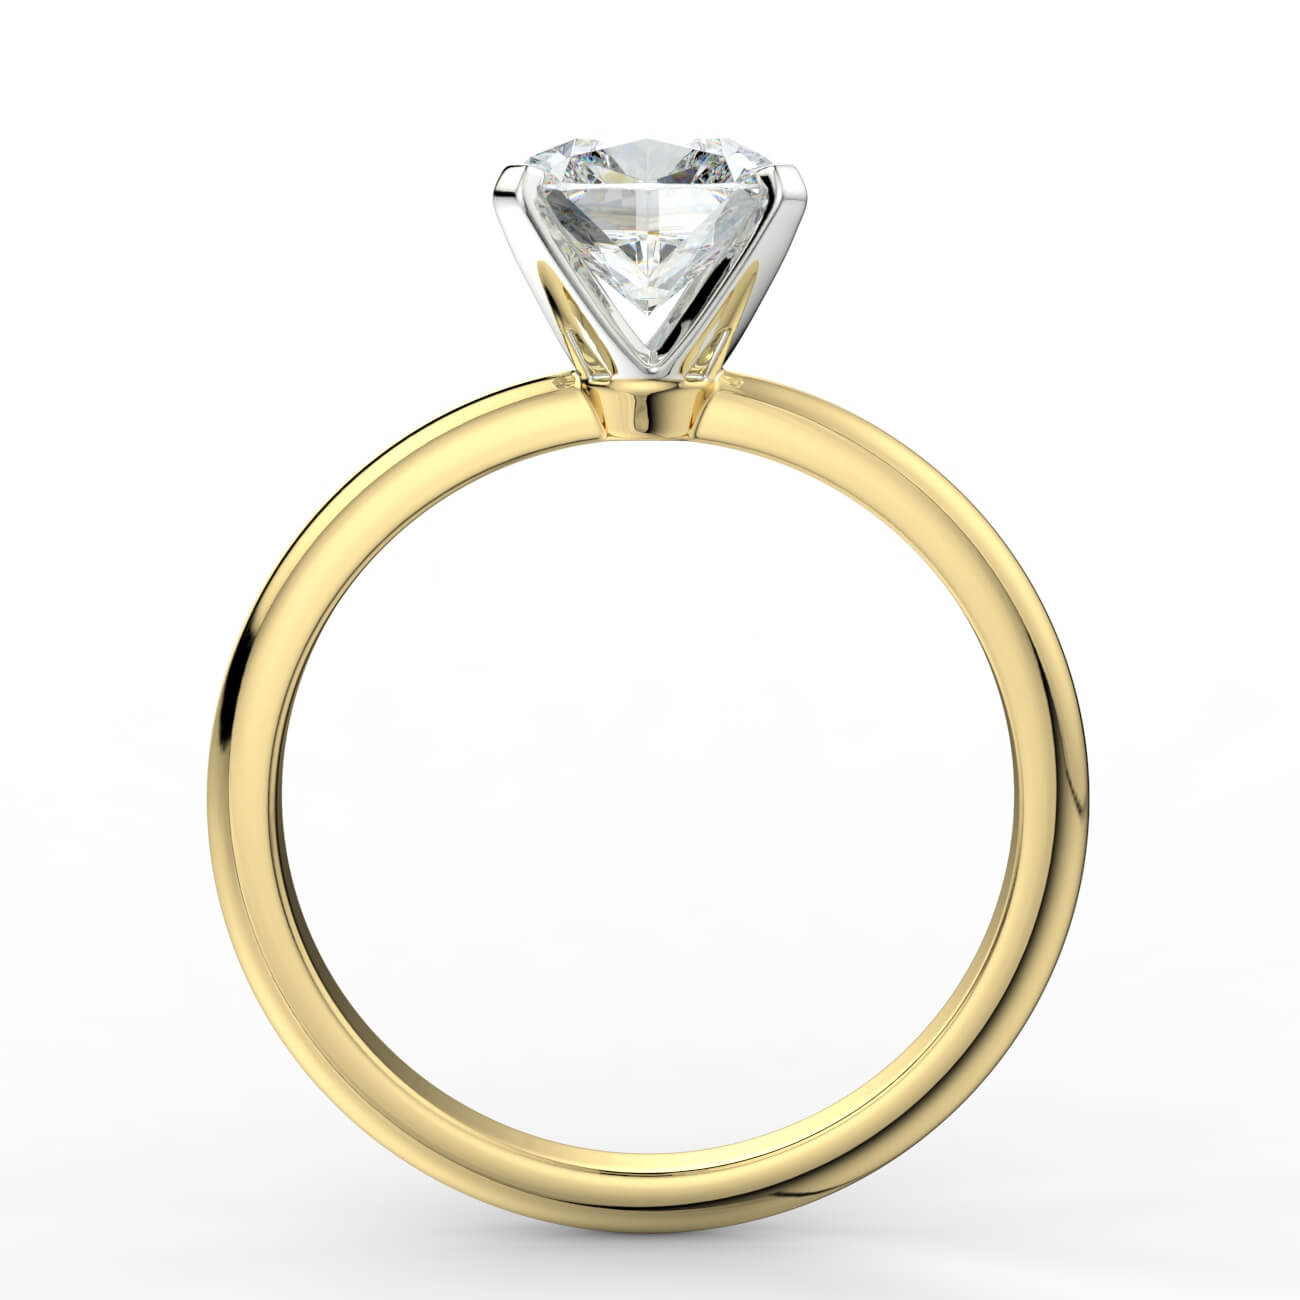 Knife-edge solitaire cushion cut diamond engagement ring in yellow and white gold – Australian Diamond Network